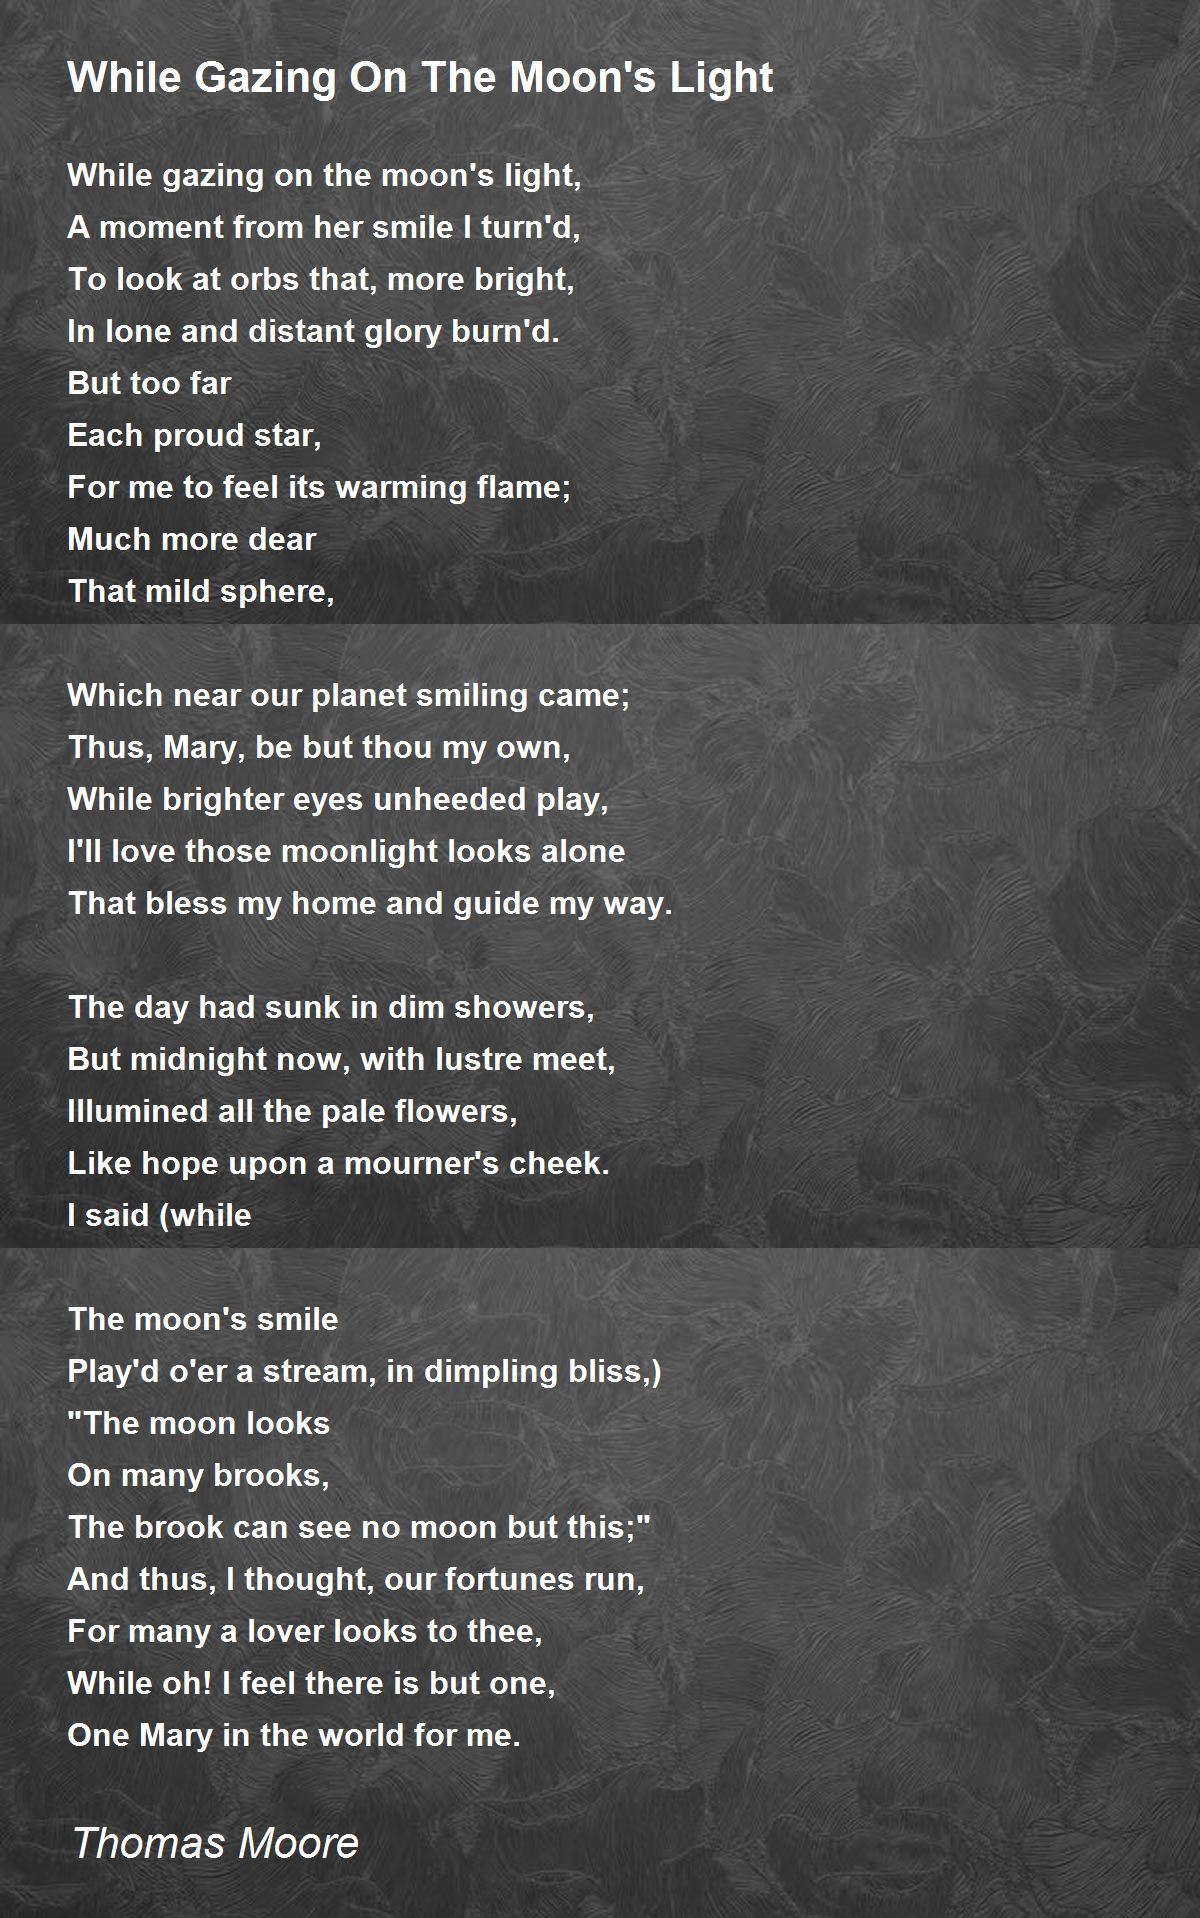 While Gazing On The Moon's Light Poem by Thomas Moore 